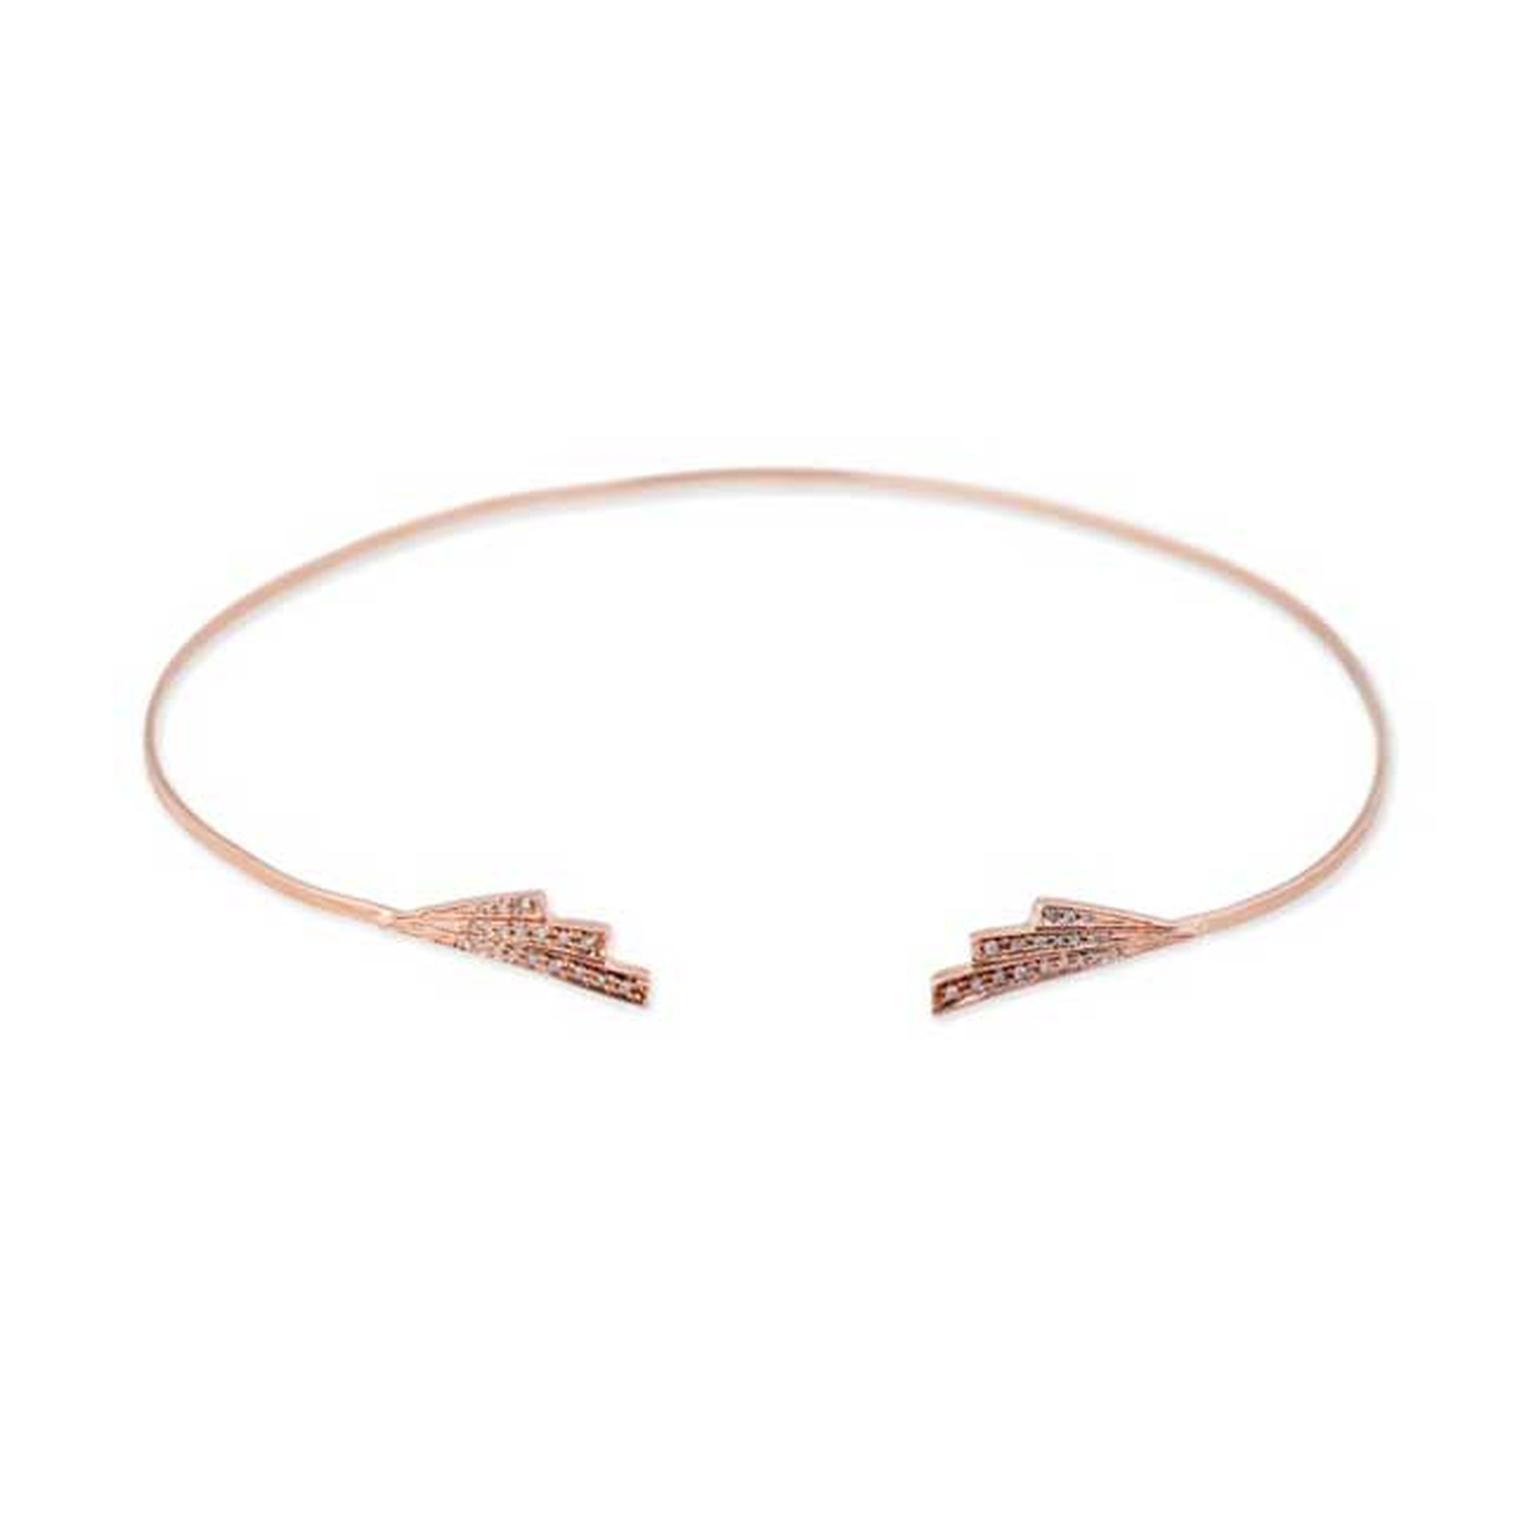 Jacquie Aiche Double Deco Wing choker in rose gold with pavé diamonds ($4,565).